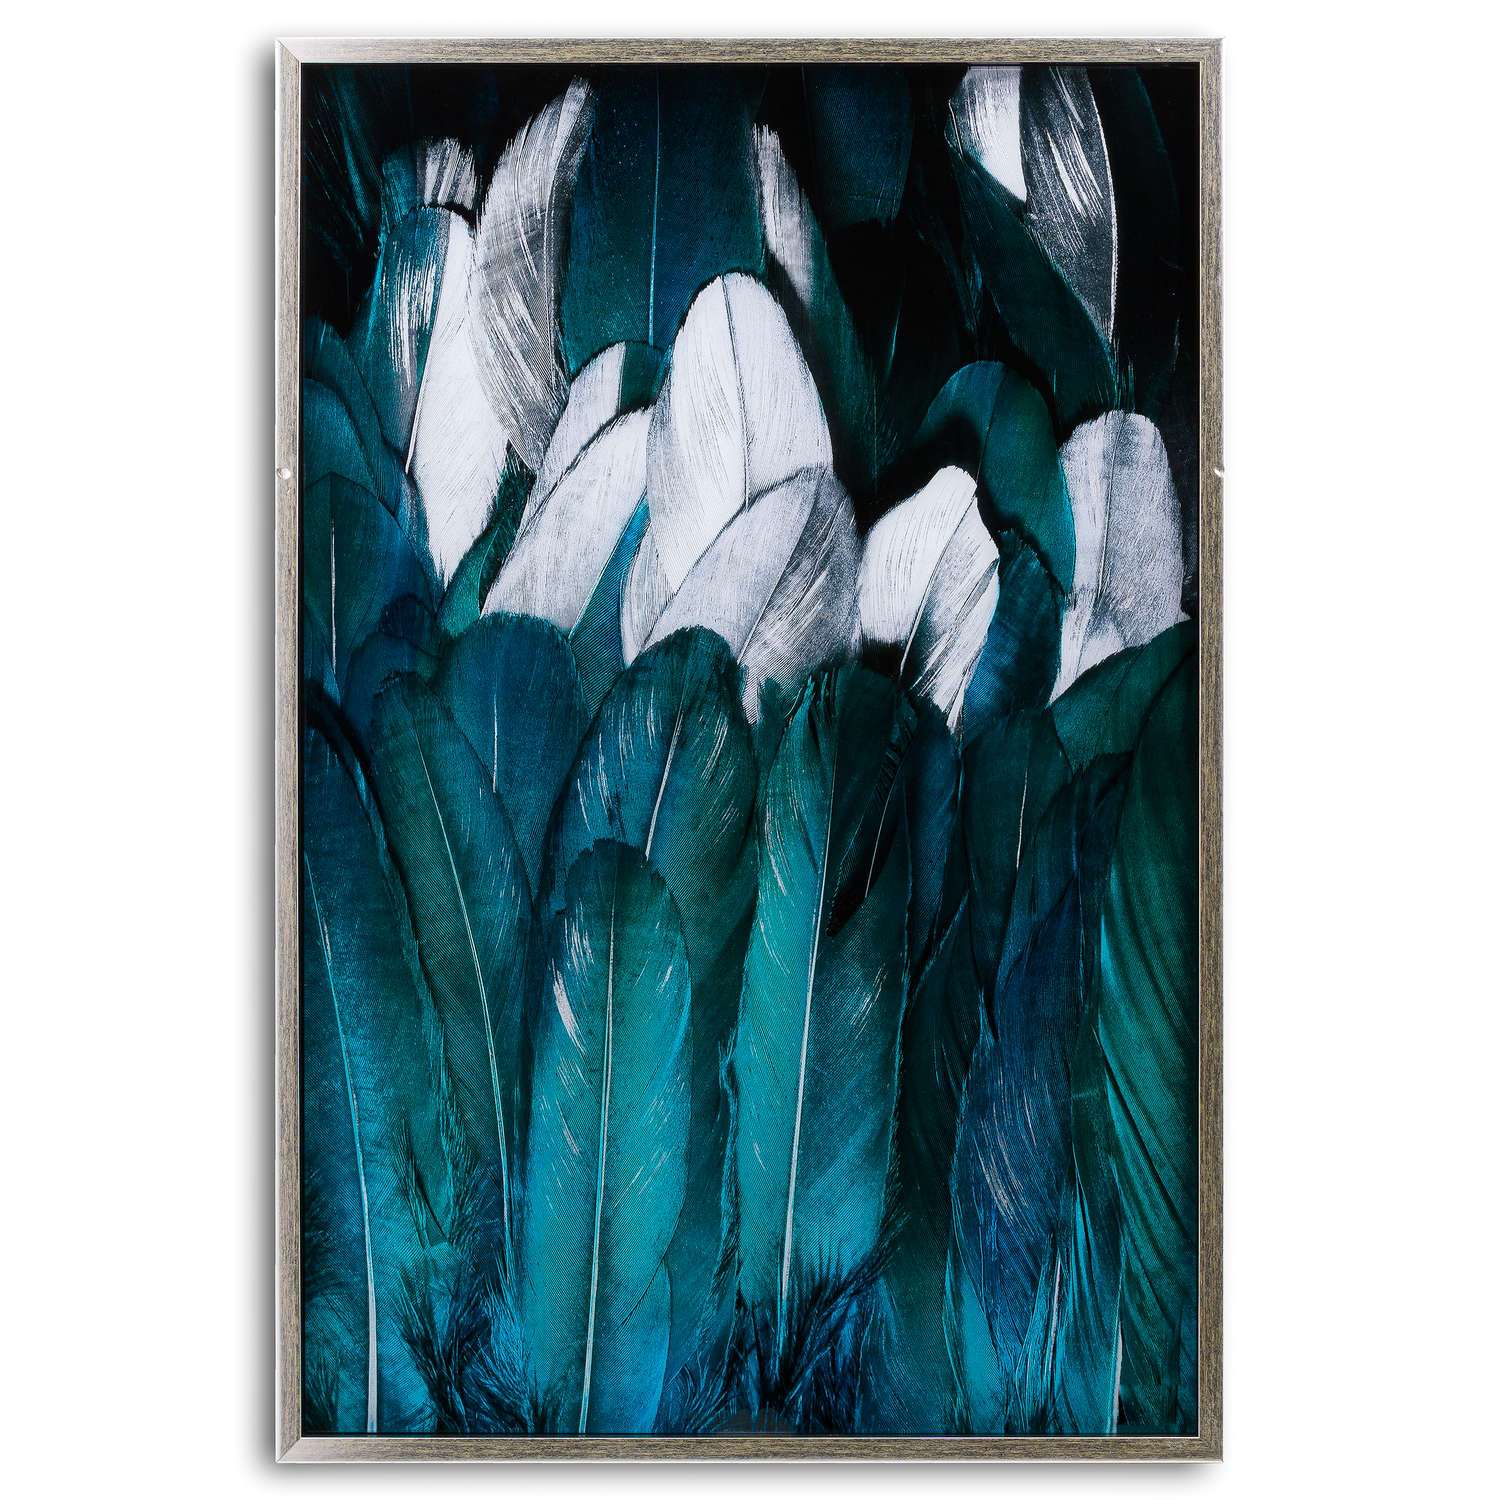 Teal And Silver Feather Glass Image In Silver Frame - Image 1